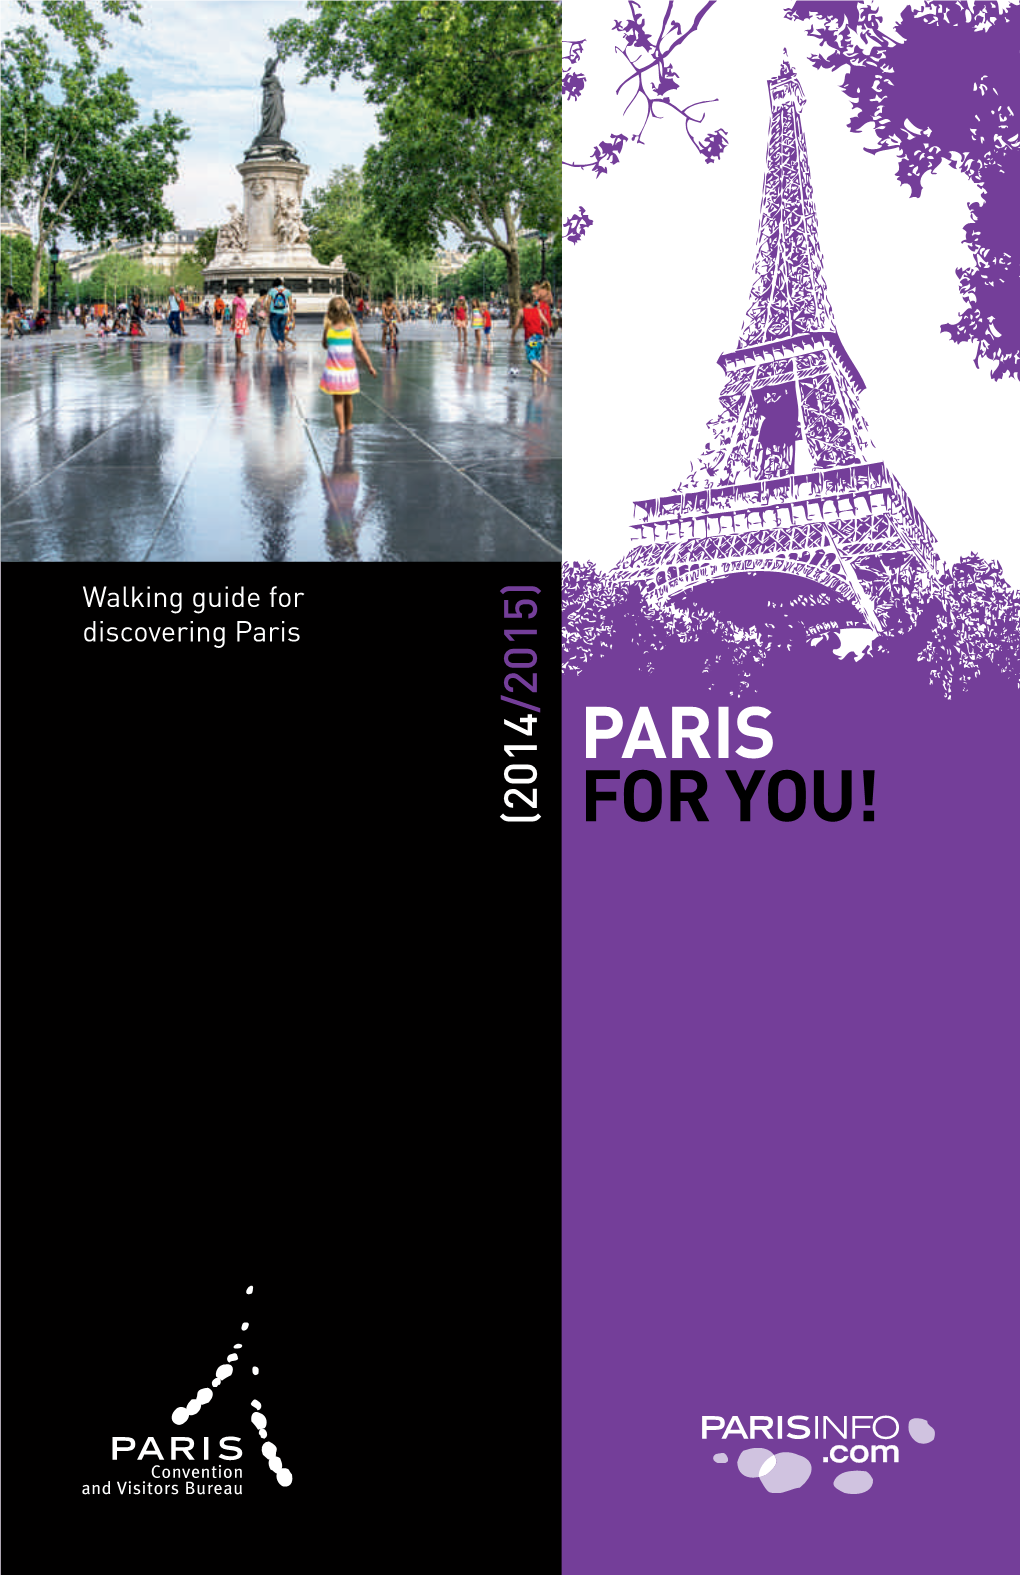 PARIS for YOU! Walking Guide for Discovering Paris 2014/2015 Discovering Paris Walking Guidefor